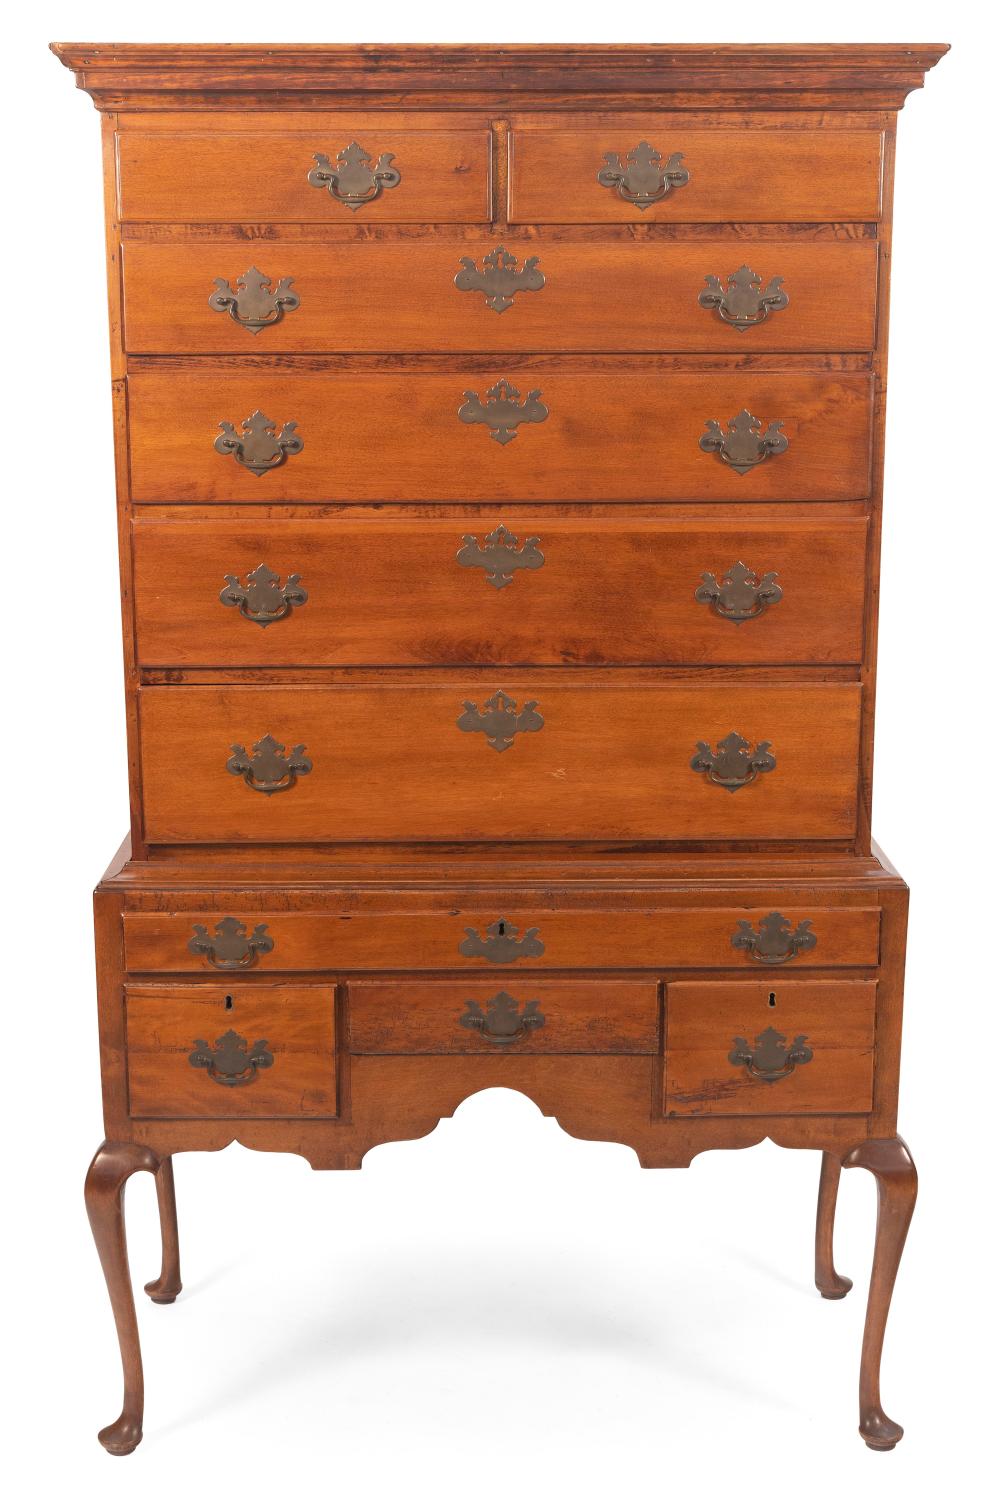 QUEEN ANNE TWO-PART HIGHBOY LATE